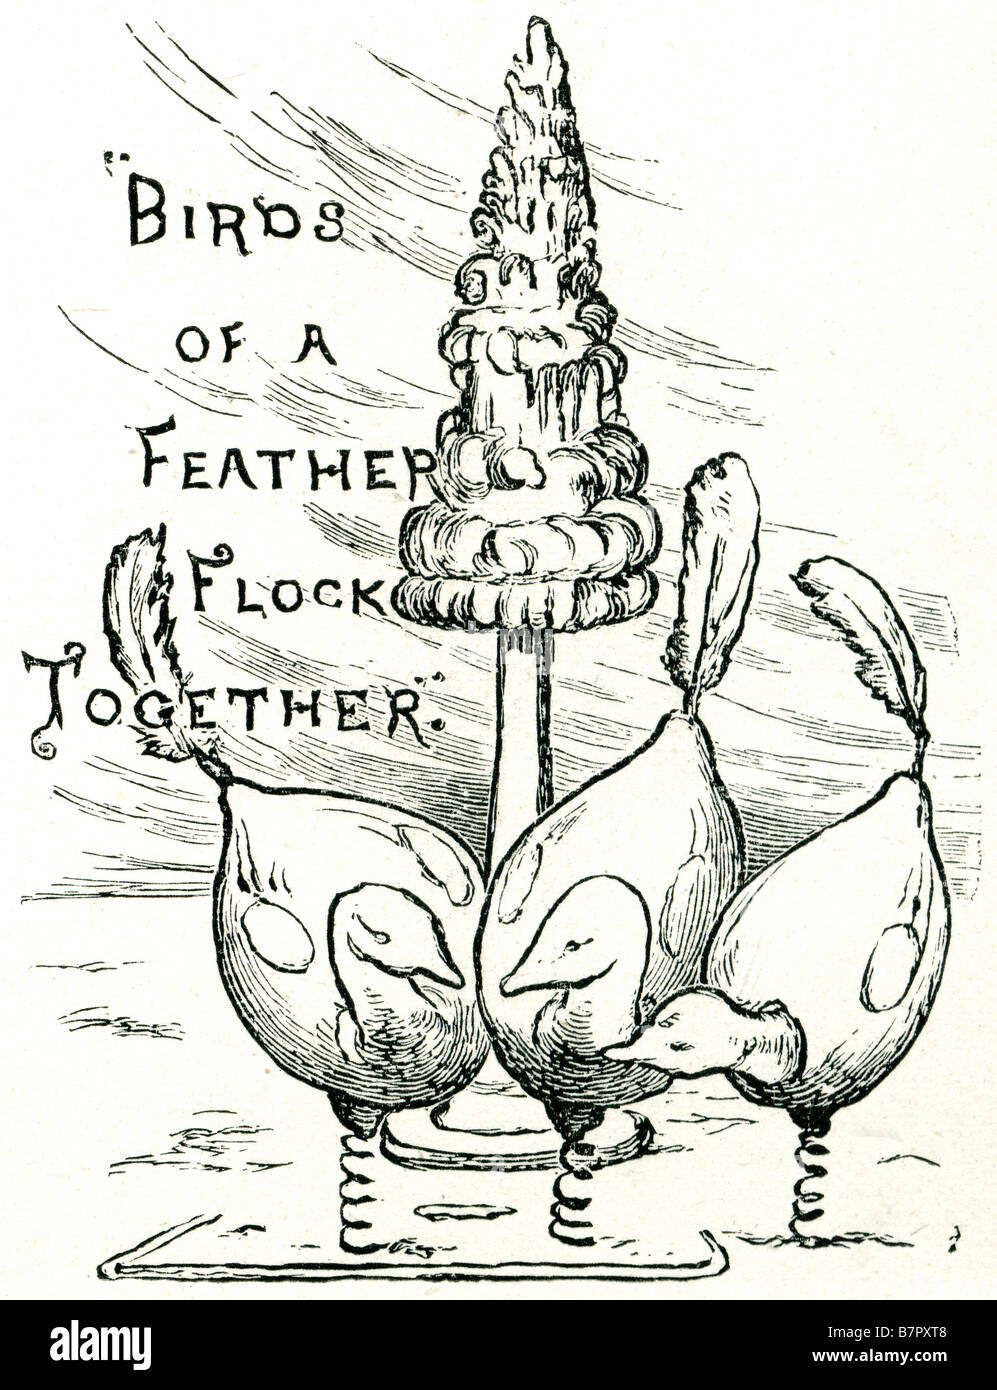 Nursery Rhyme Birds Of A Feather Flock Together Sayings The Idiom